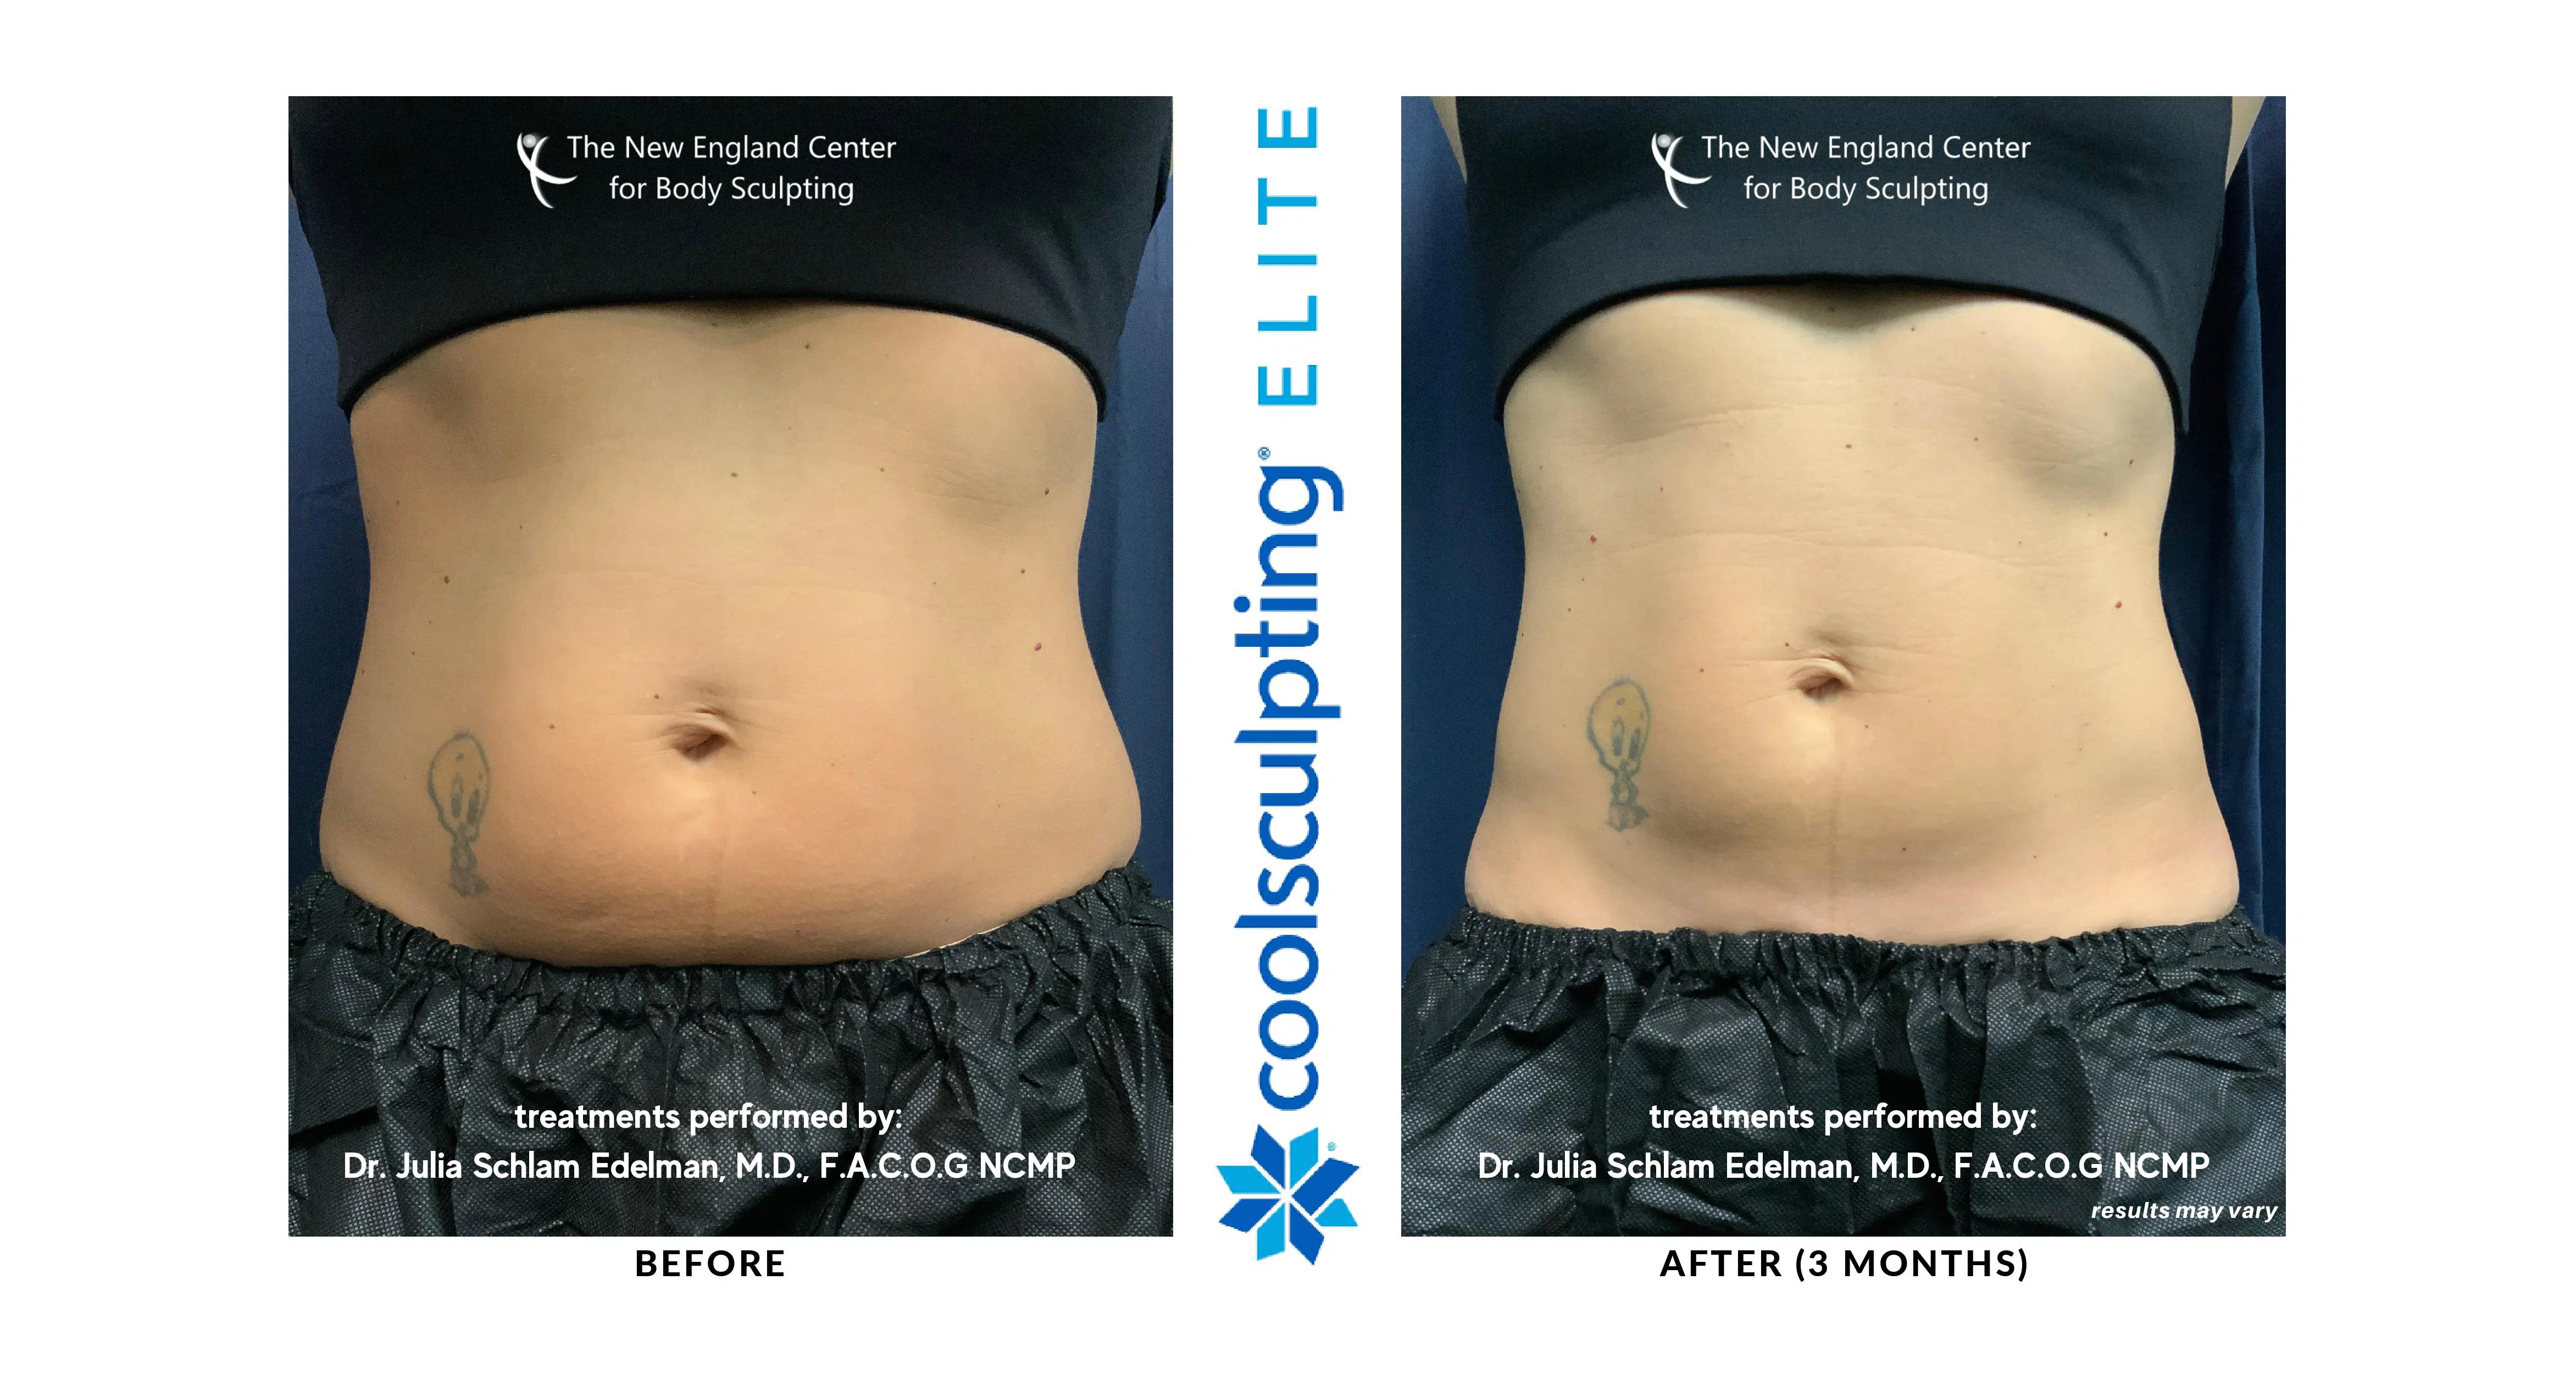 CoolSculpting versus Liposuction: Which One Is Best for You?